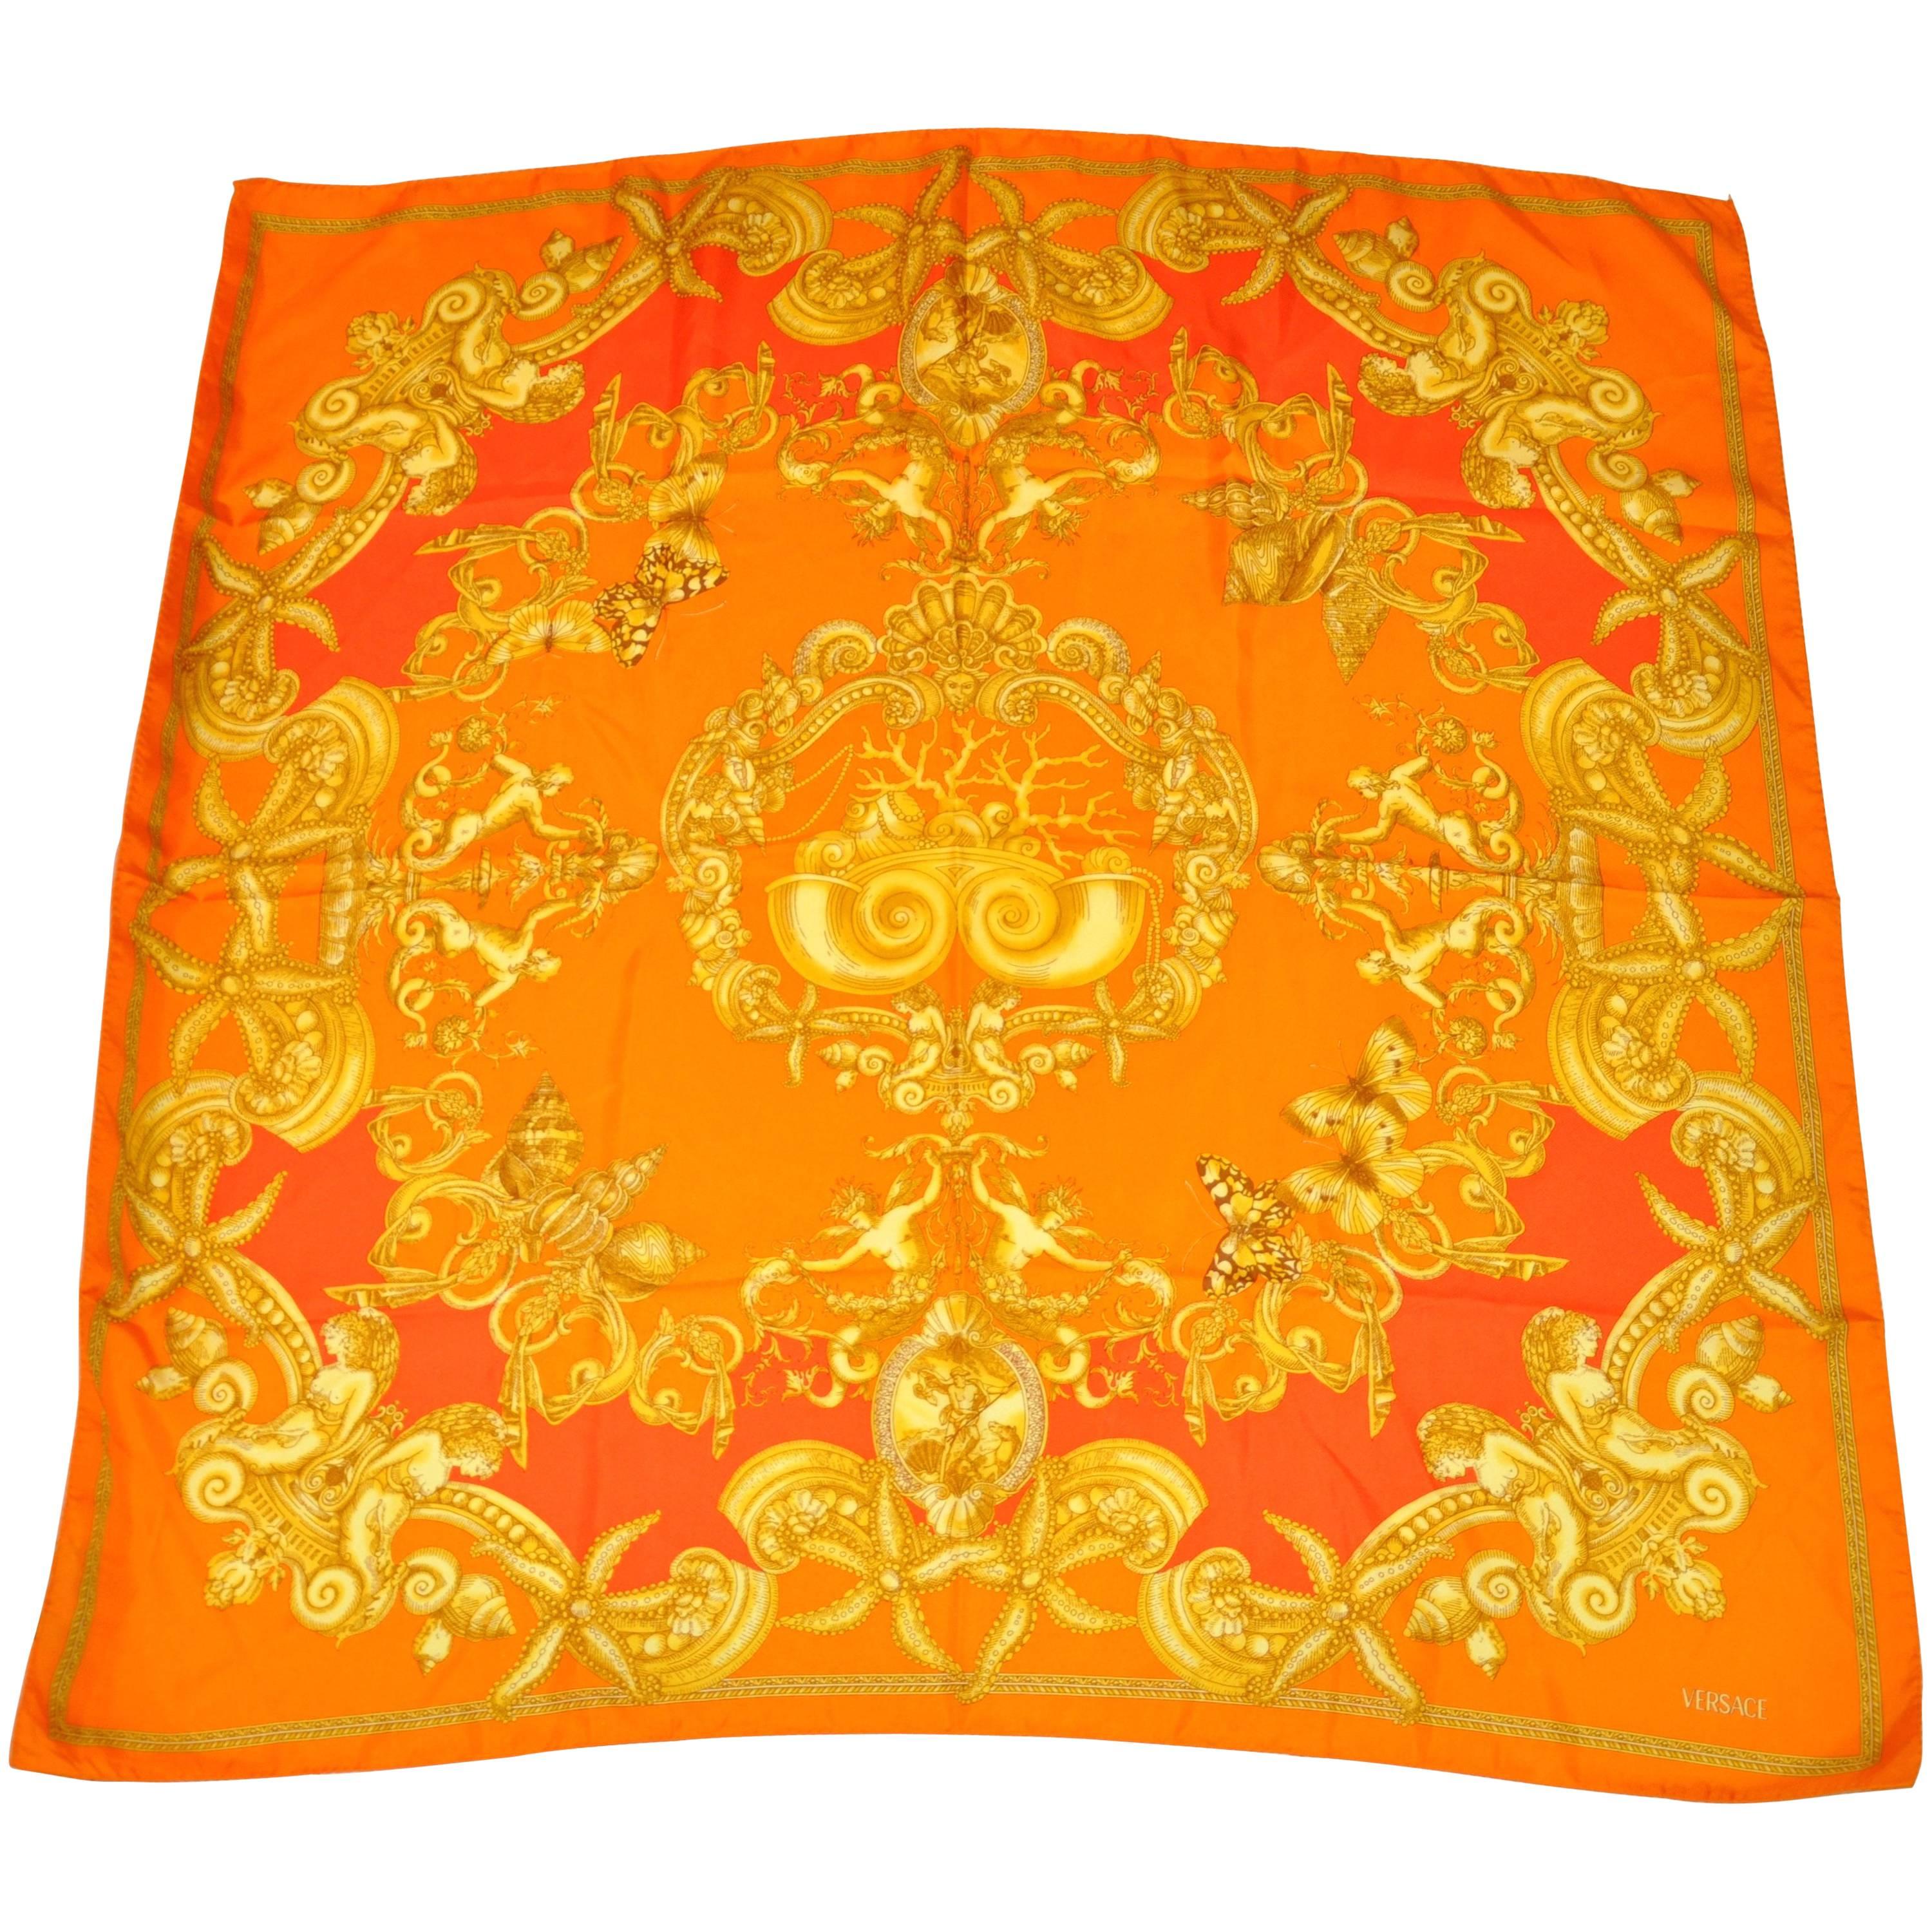 Gianni Versace Bold and Vivid Shades of Tangerines and Gold Silk Scarf